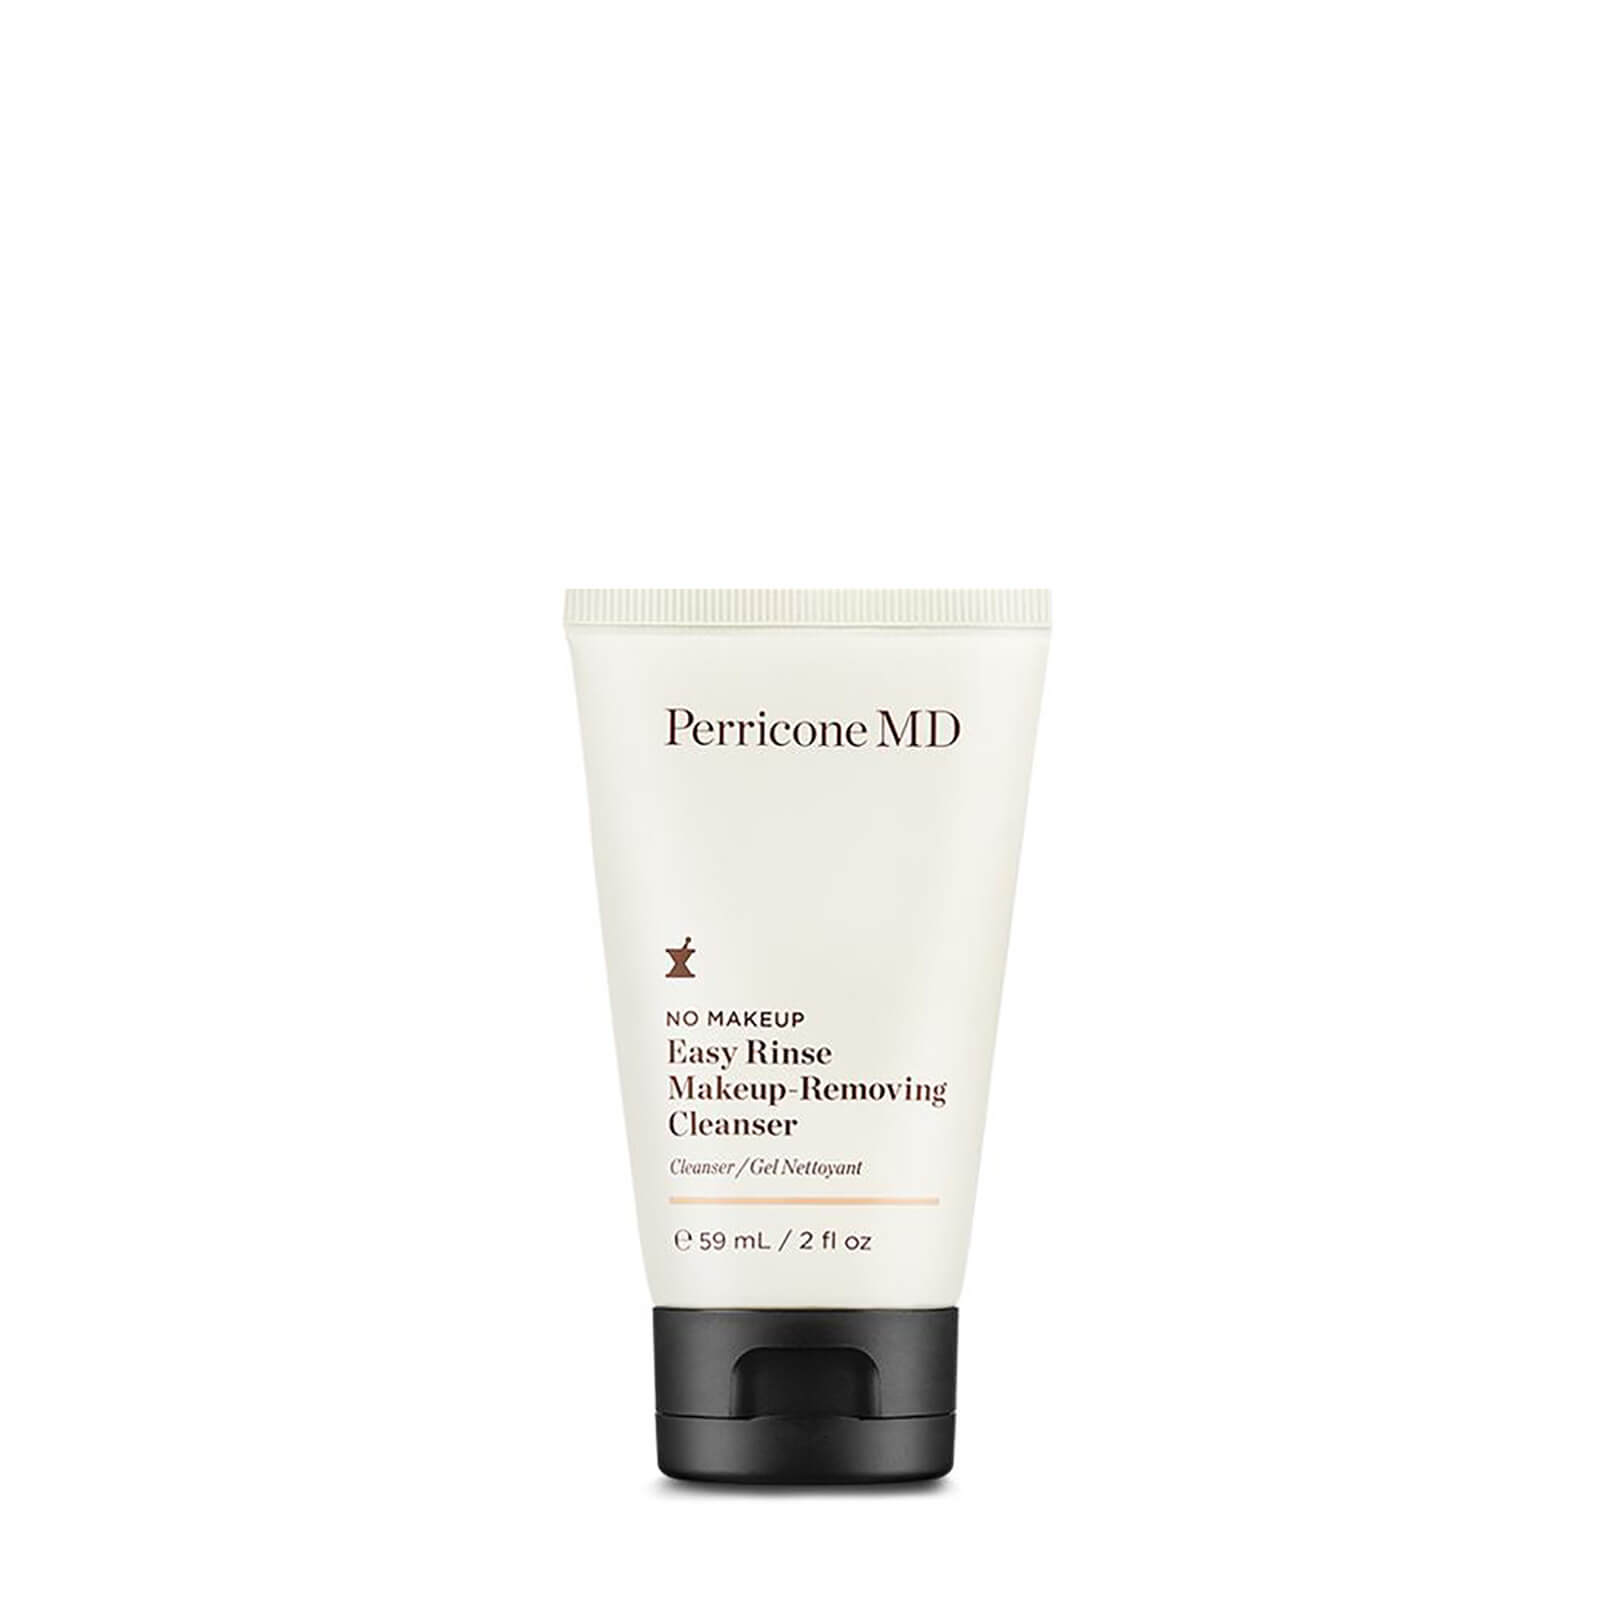 PERRICONE MD NO MAKEUP EASY RINSE MAKEUP-REMOVING CLEANSER,52480011